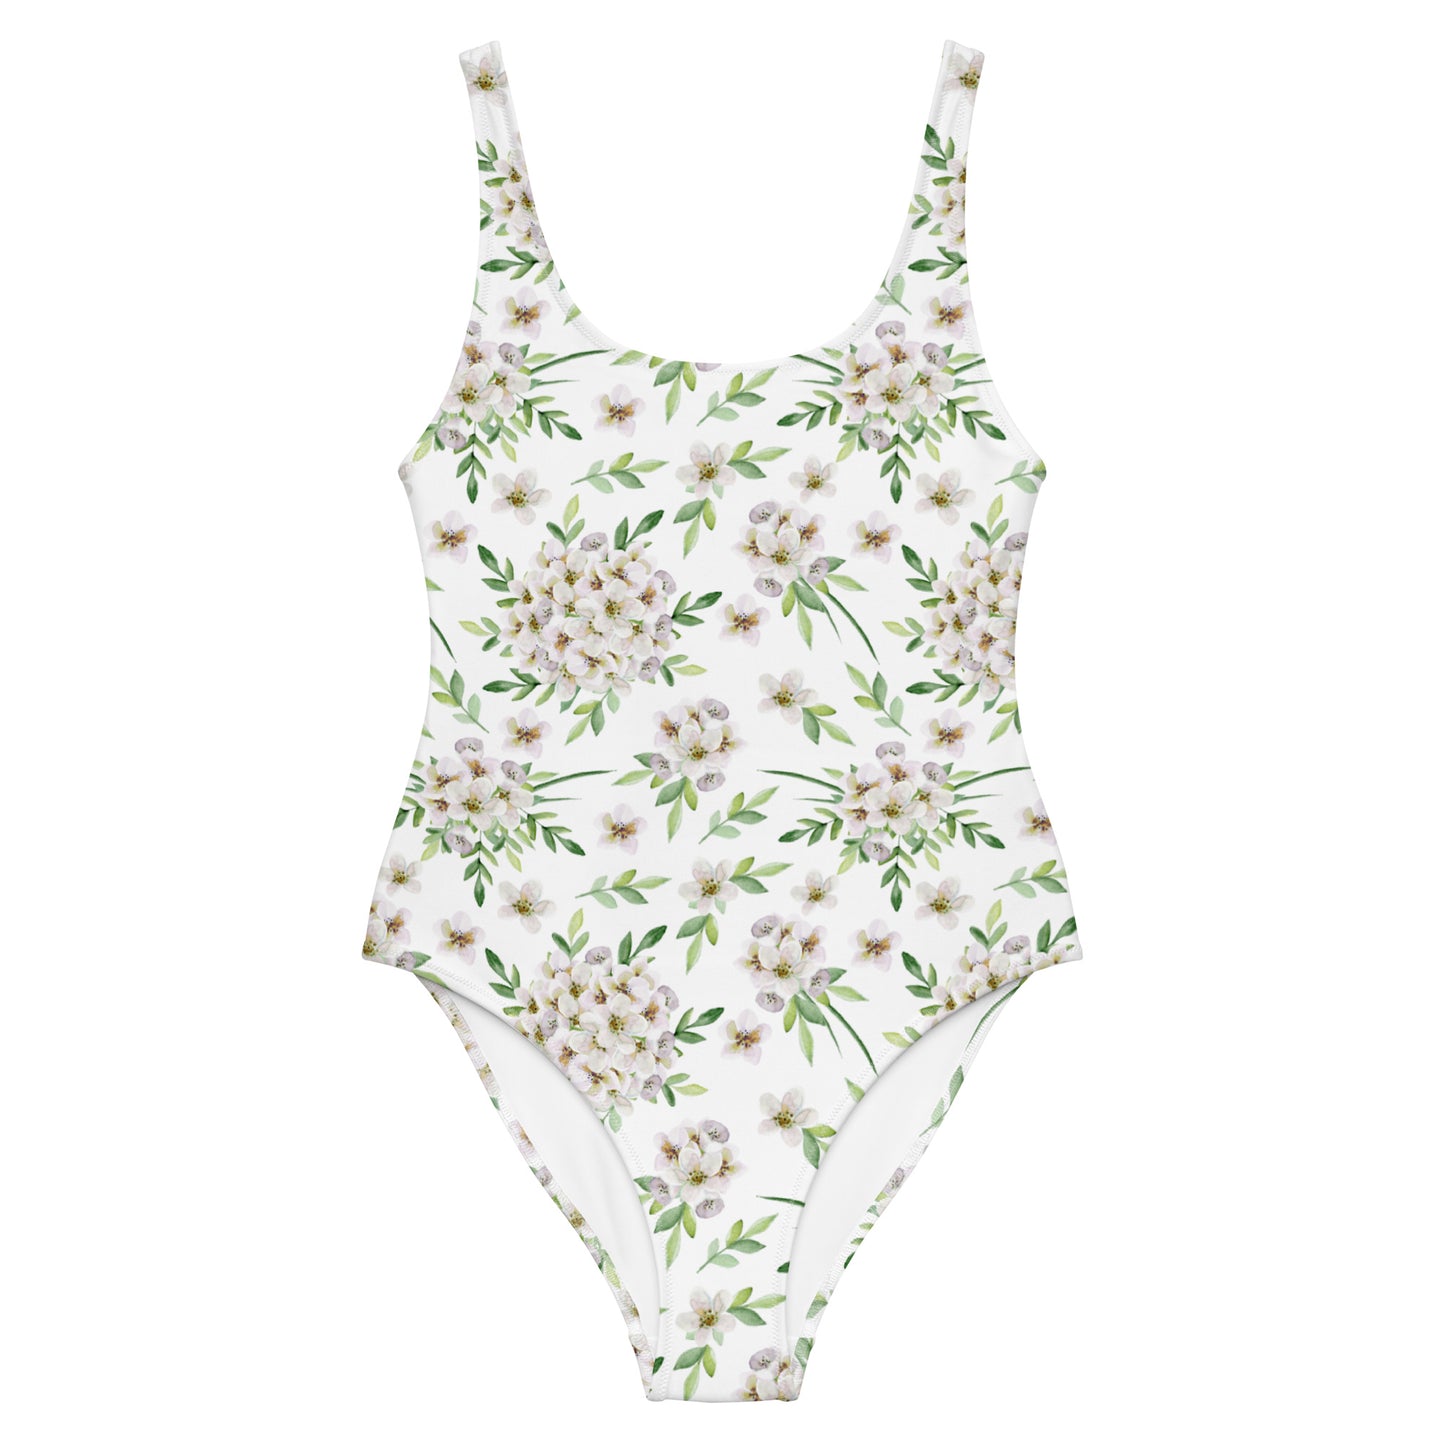 Bedford One-Piece Swimsuit